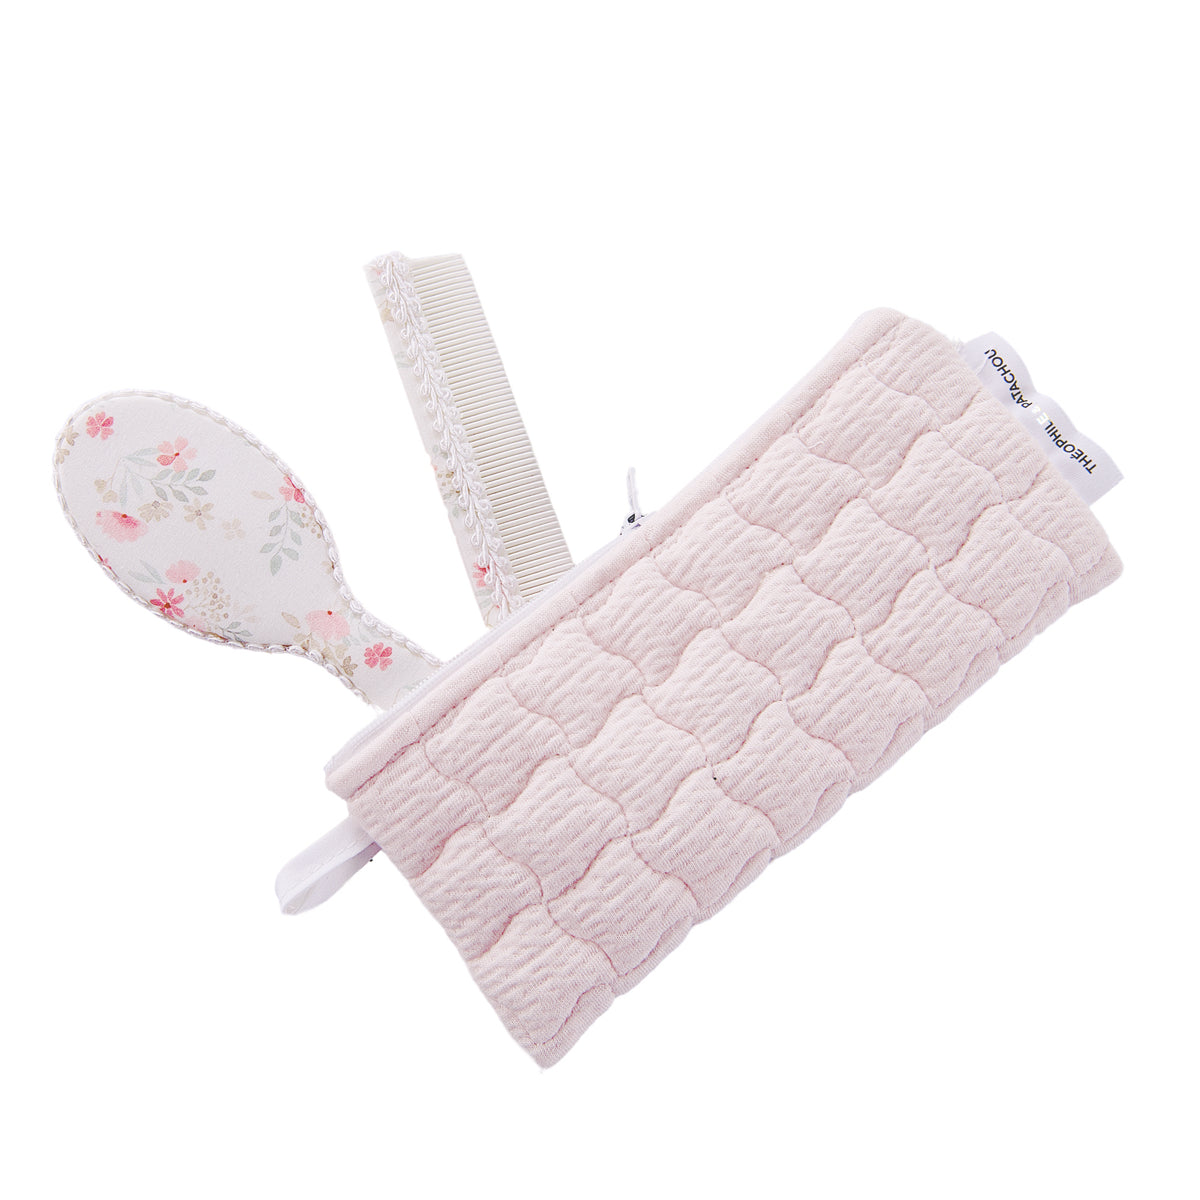 Theophile & Patachou Brush and Comb - Pink Flower